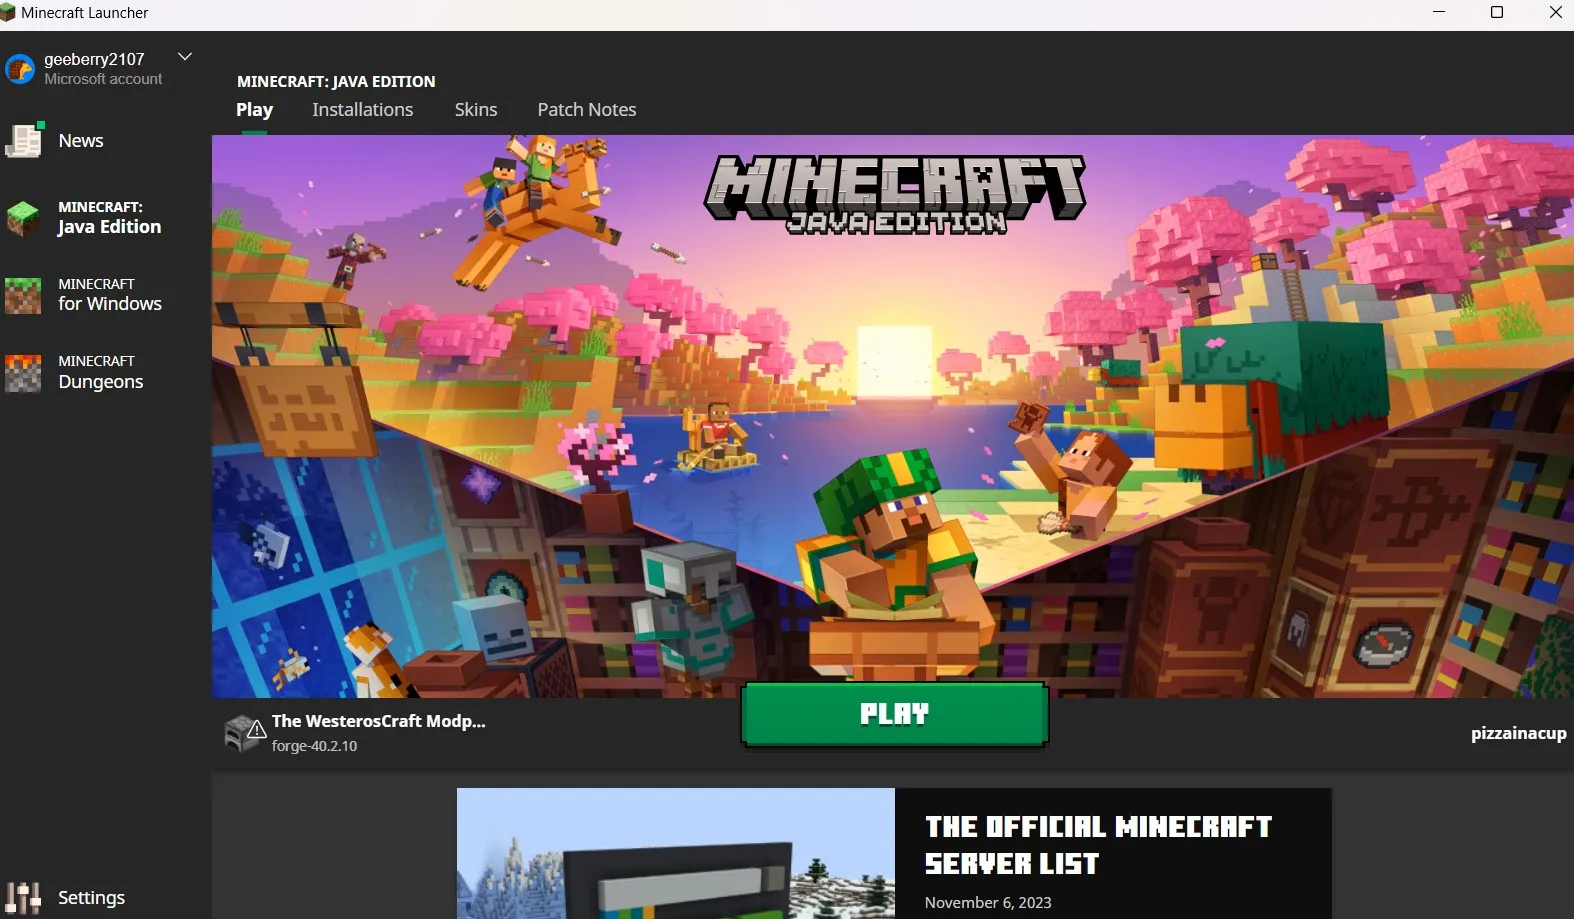 A screenshot of the minecraft launcher with the WesterosCraft modpack installed